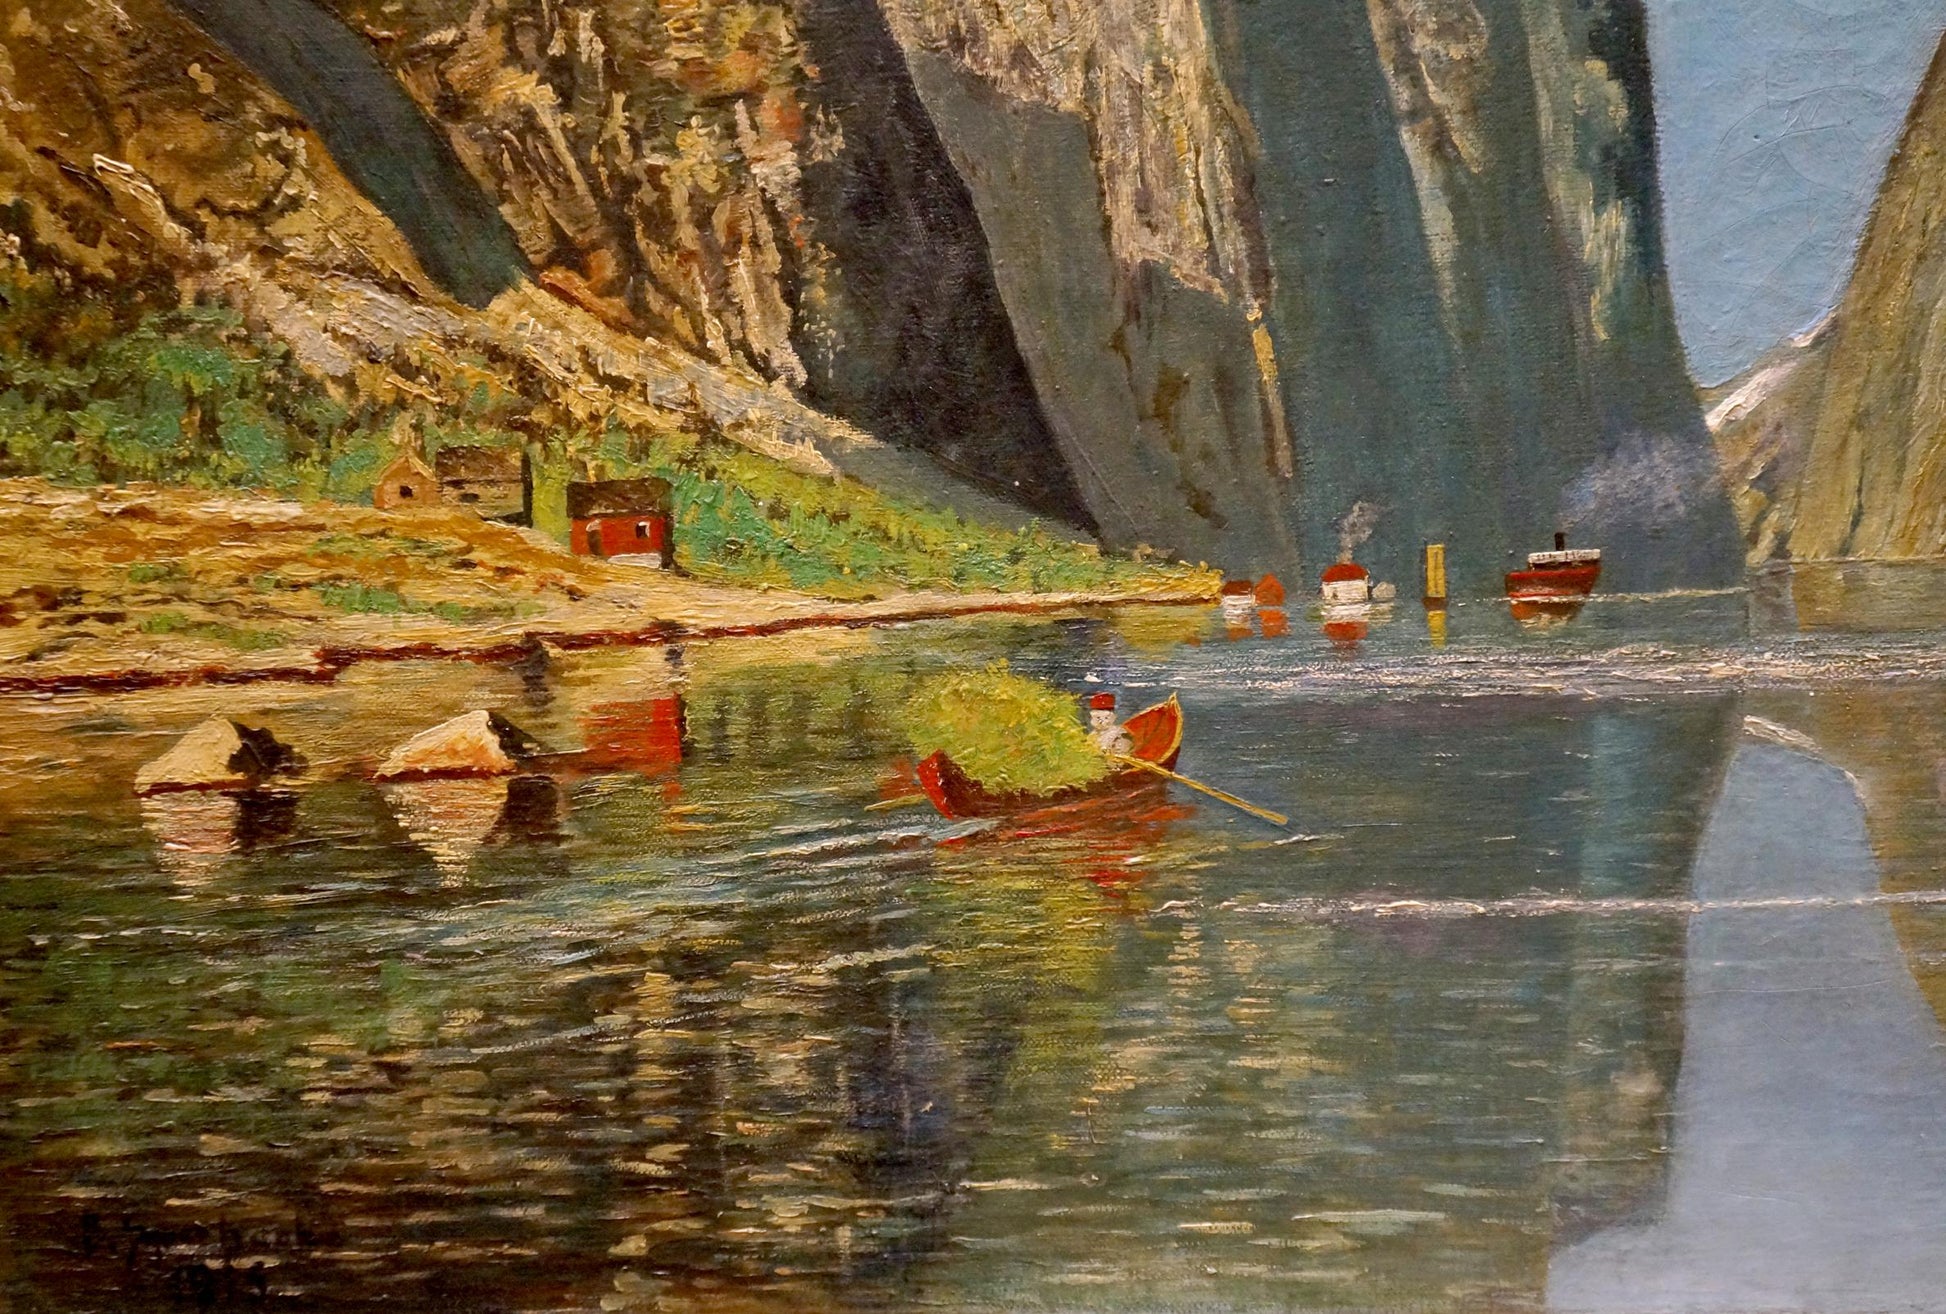 A European artist captured a river winding through the mountains in an oil painting